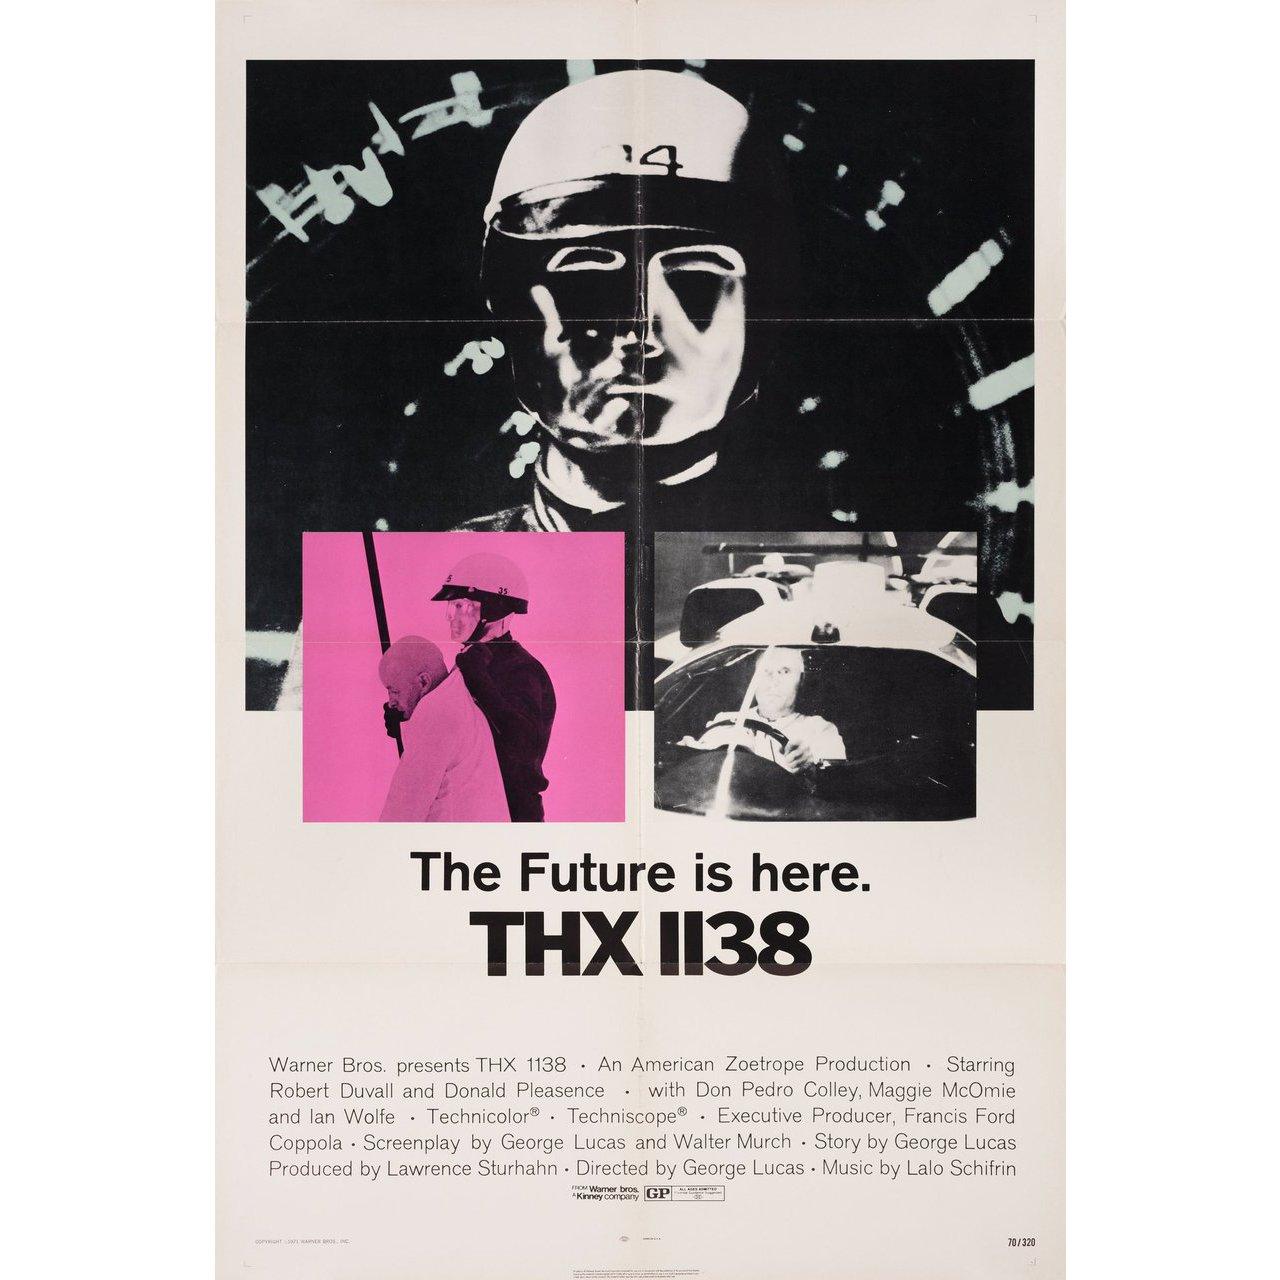 Original 1971 U.S. one sheet poster for the film THX 1138 directed by George Lucas with Robert Duvall / Donald Pleasence / Don Pedro Colley / Maggie McOmie. Very Good-Fine condition, folded. Many original posters were issued folded or were